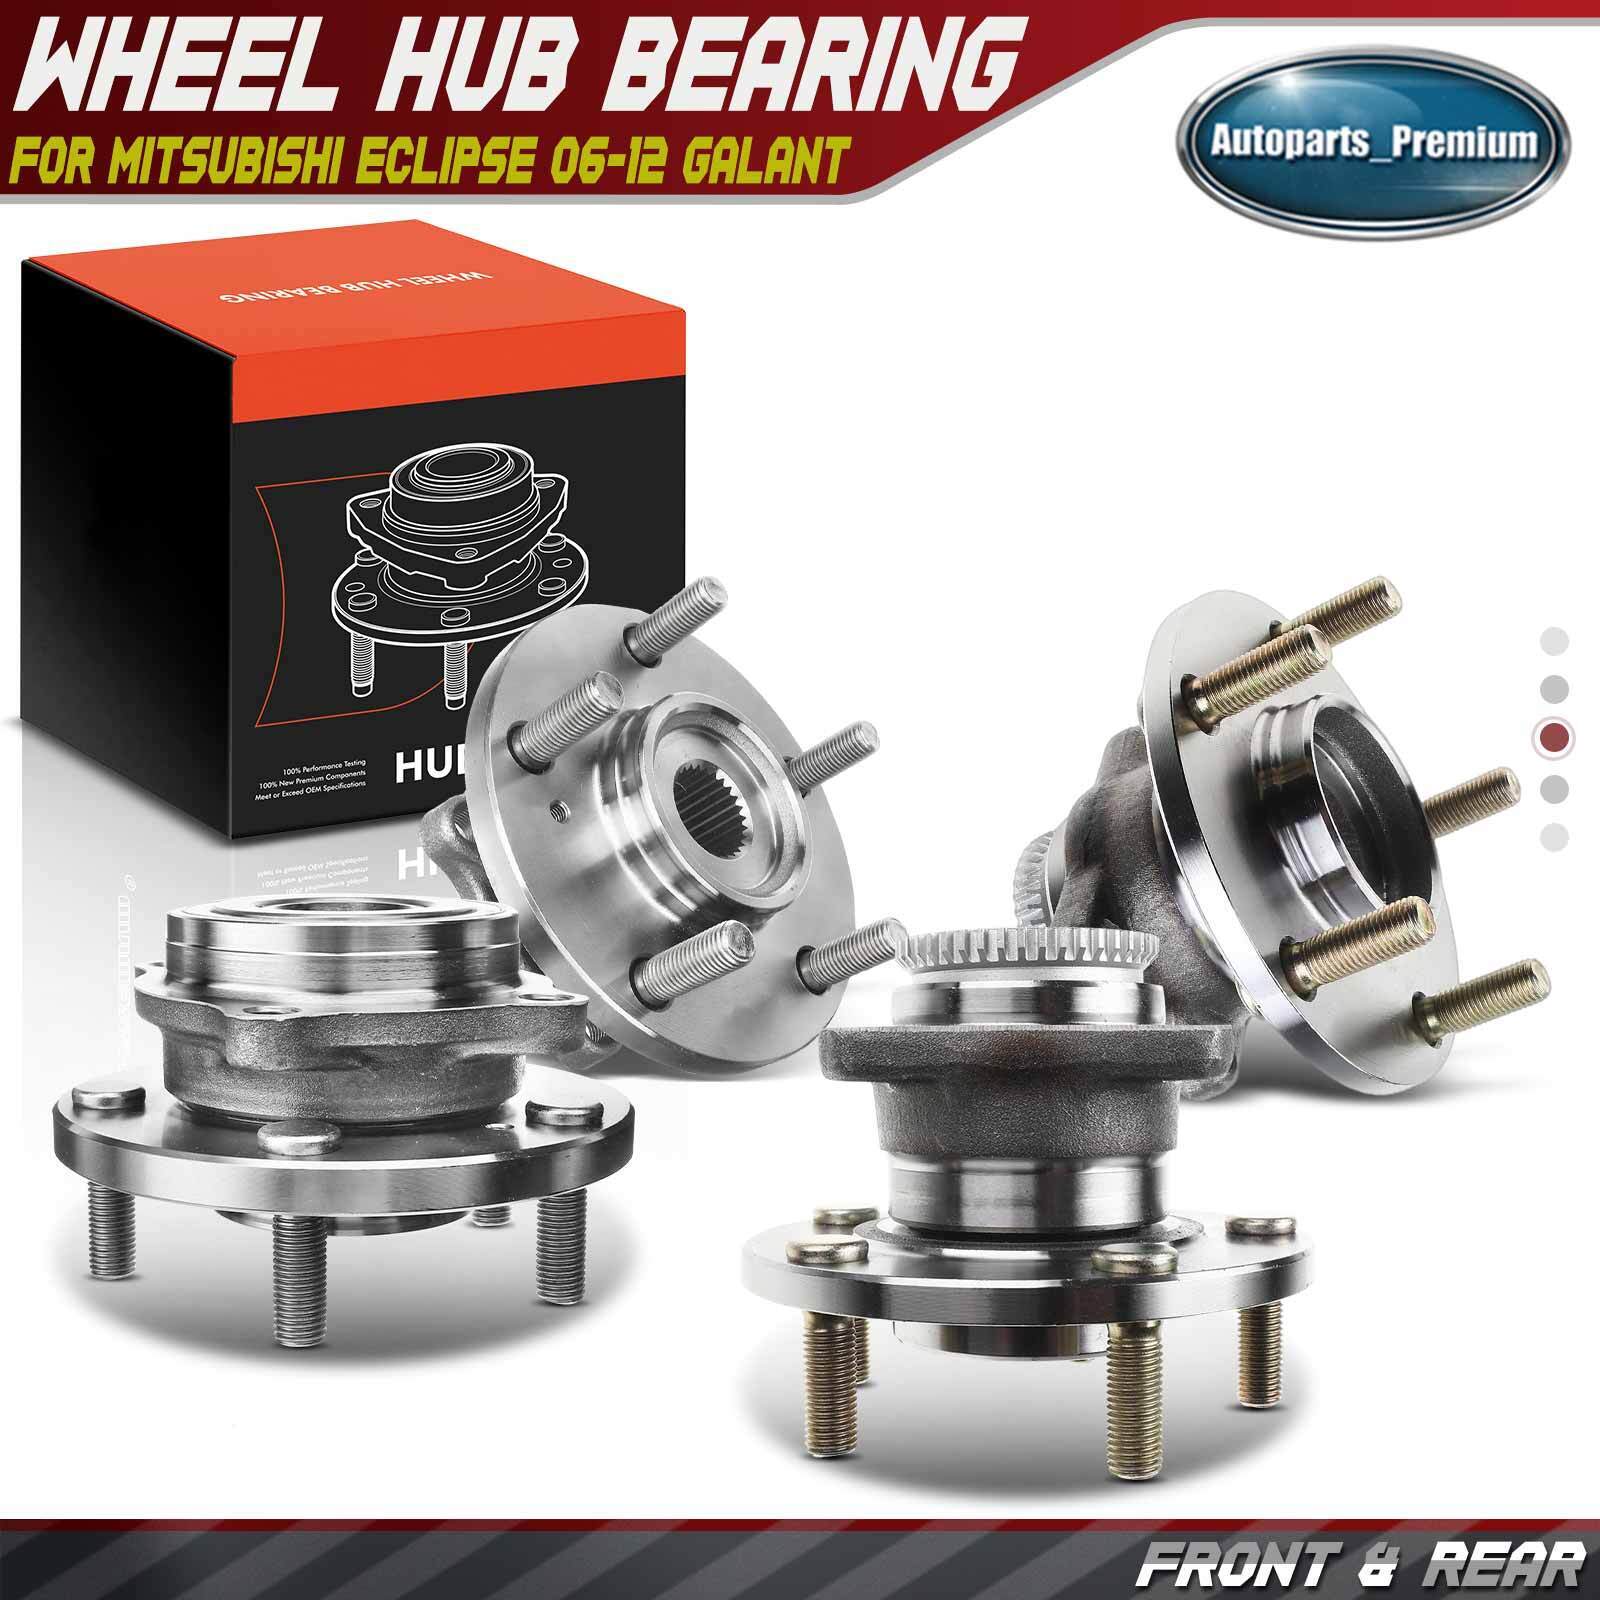 4x Front and Rear Wheel Hub Bearing Assembly for Mitsubishi Eclipse 06-12 Galant